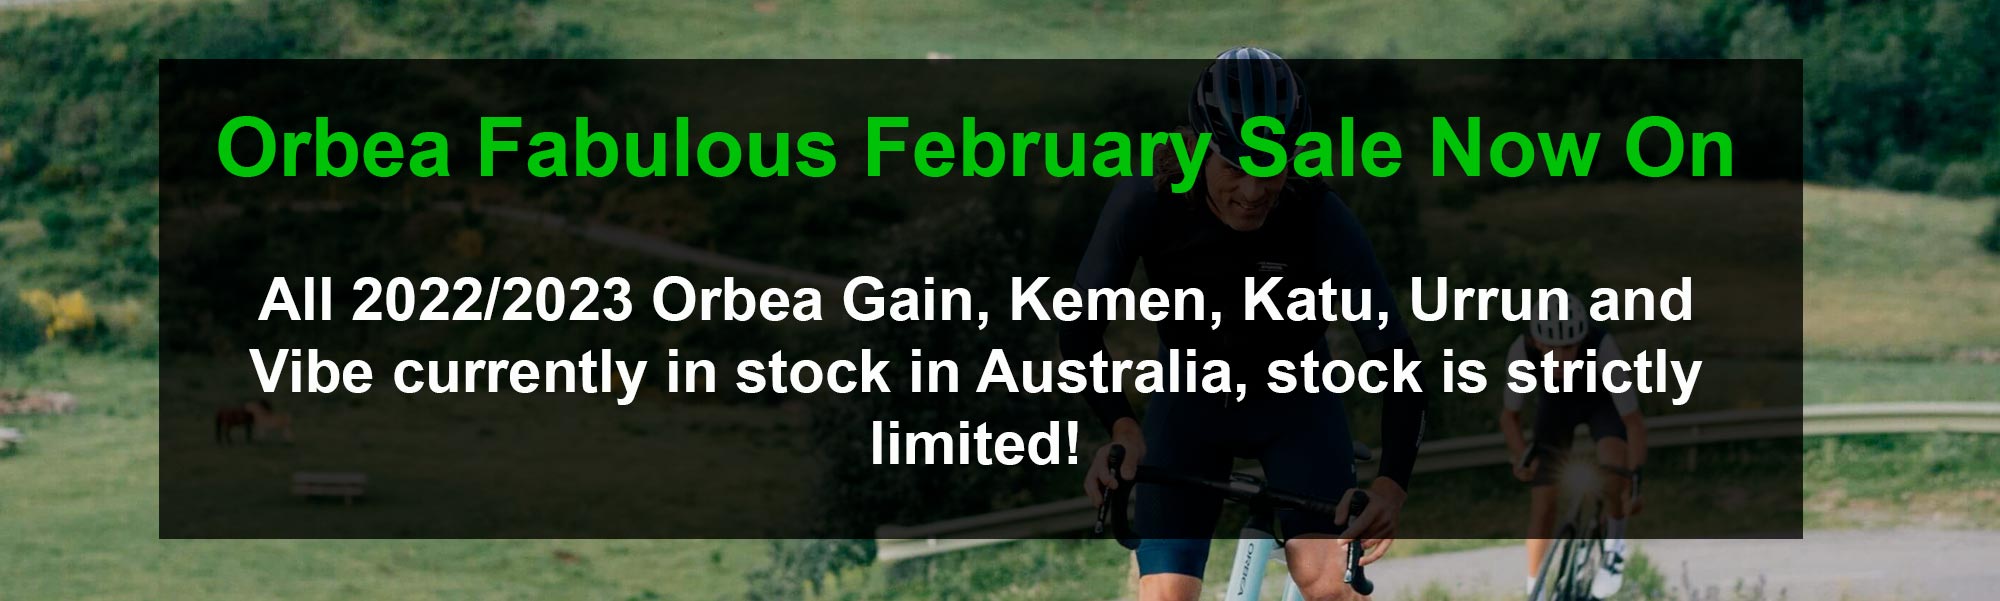 Fabulous February Sale Now On some of our Orbea ebikes